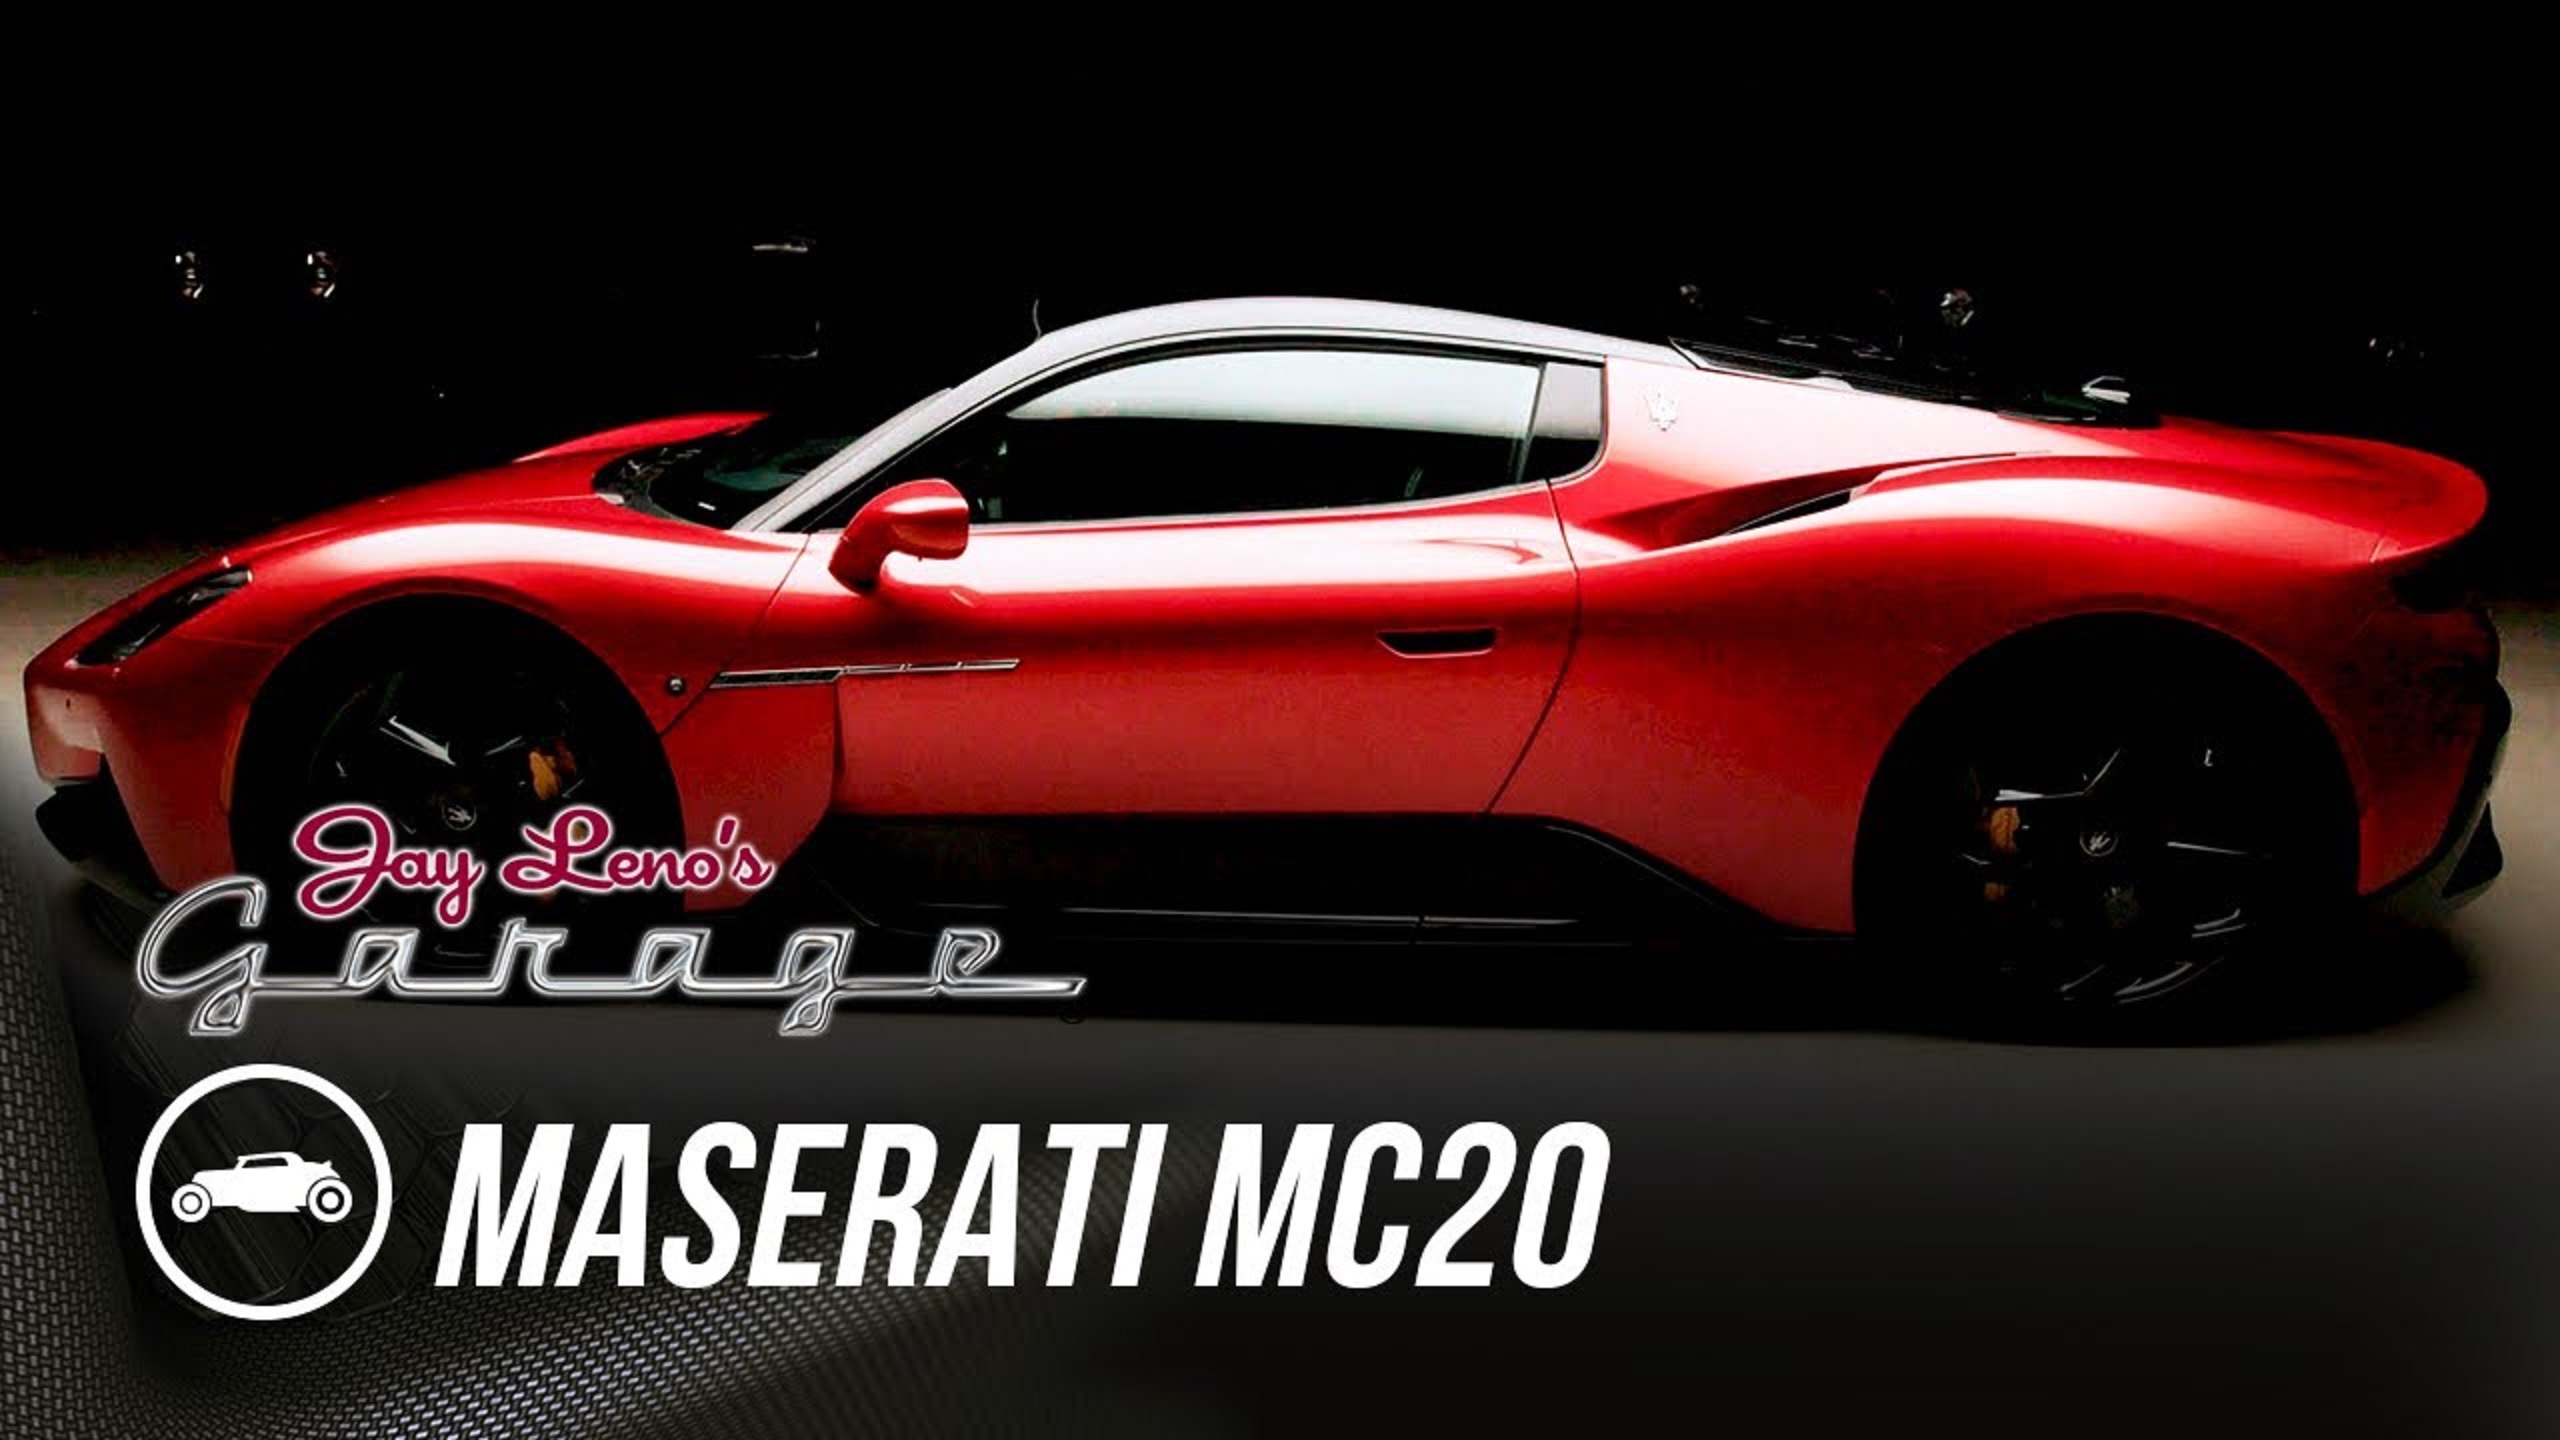 The side view of a red-and-black 2022 Maserati MC20 in Jay Leno's garage